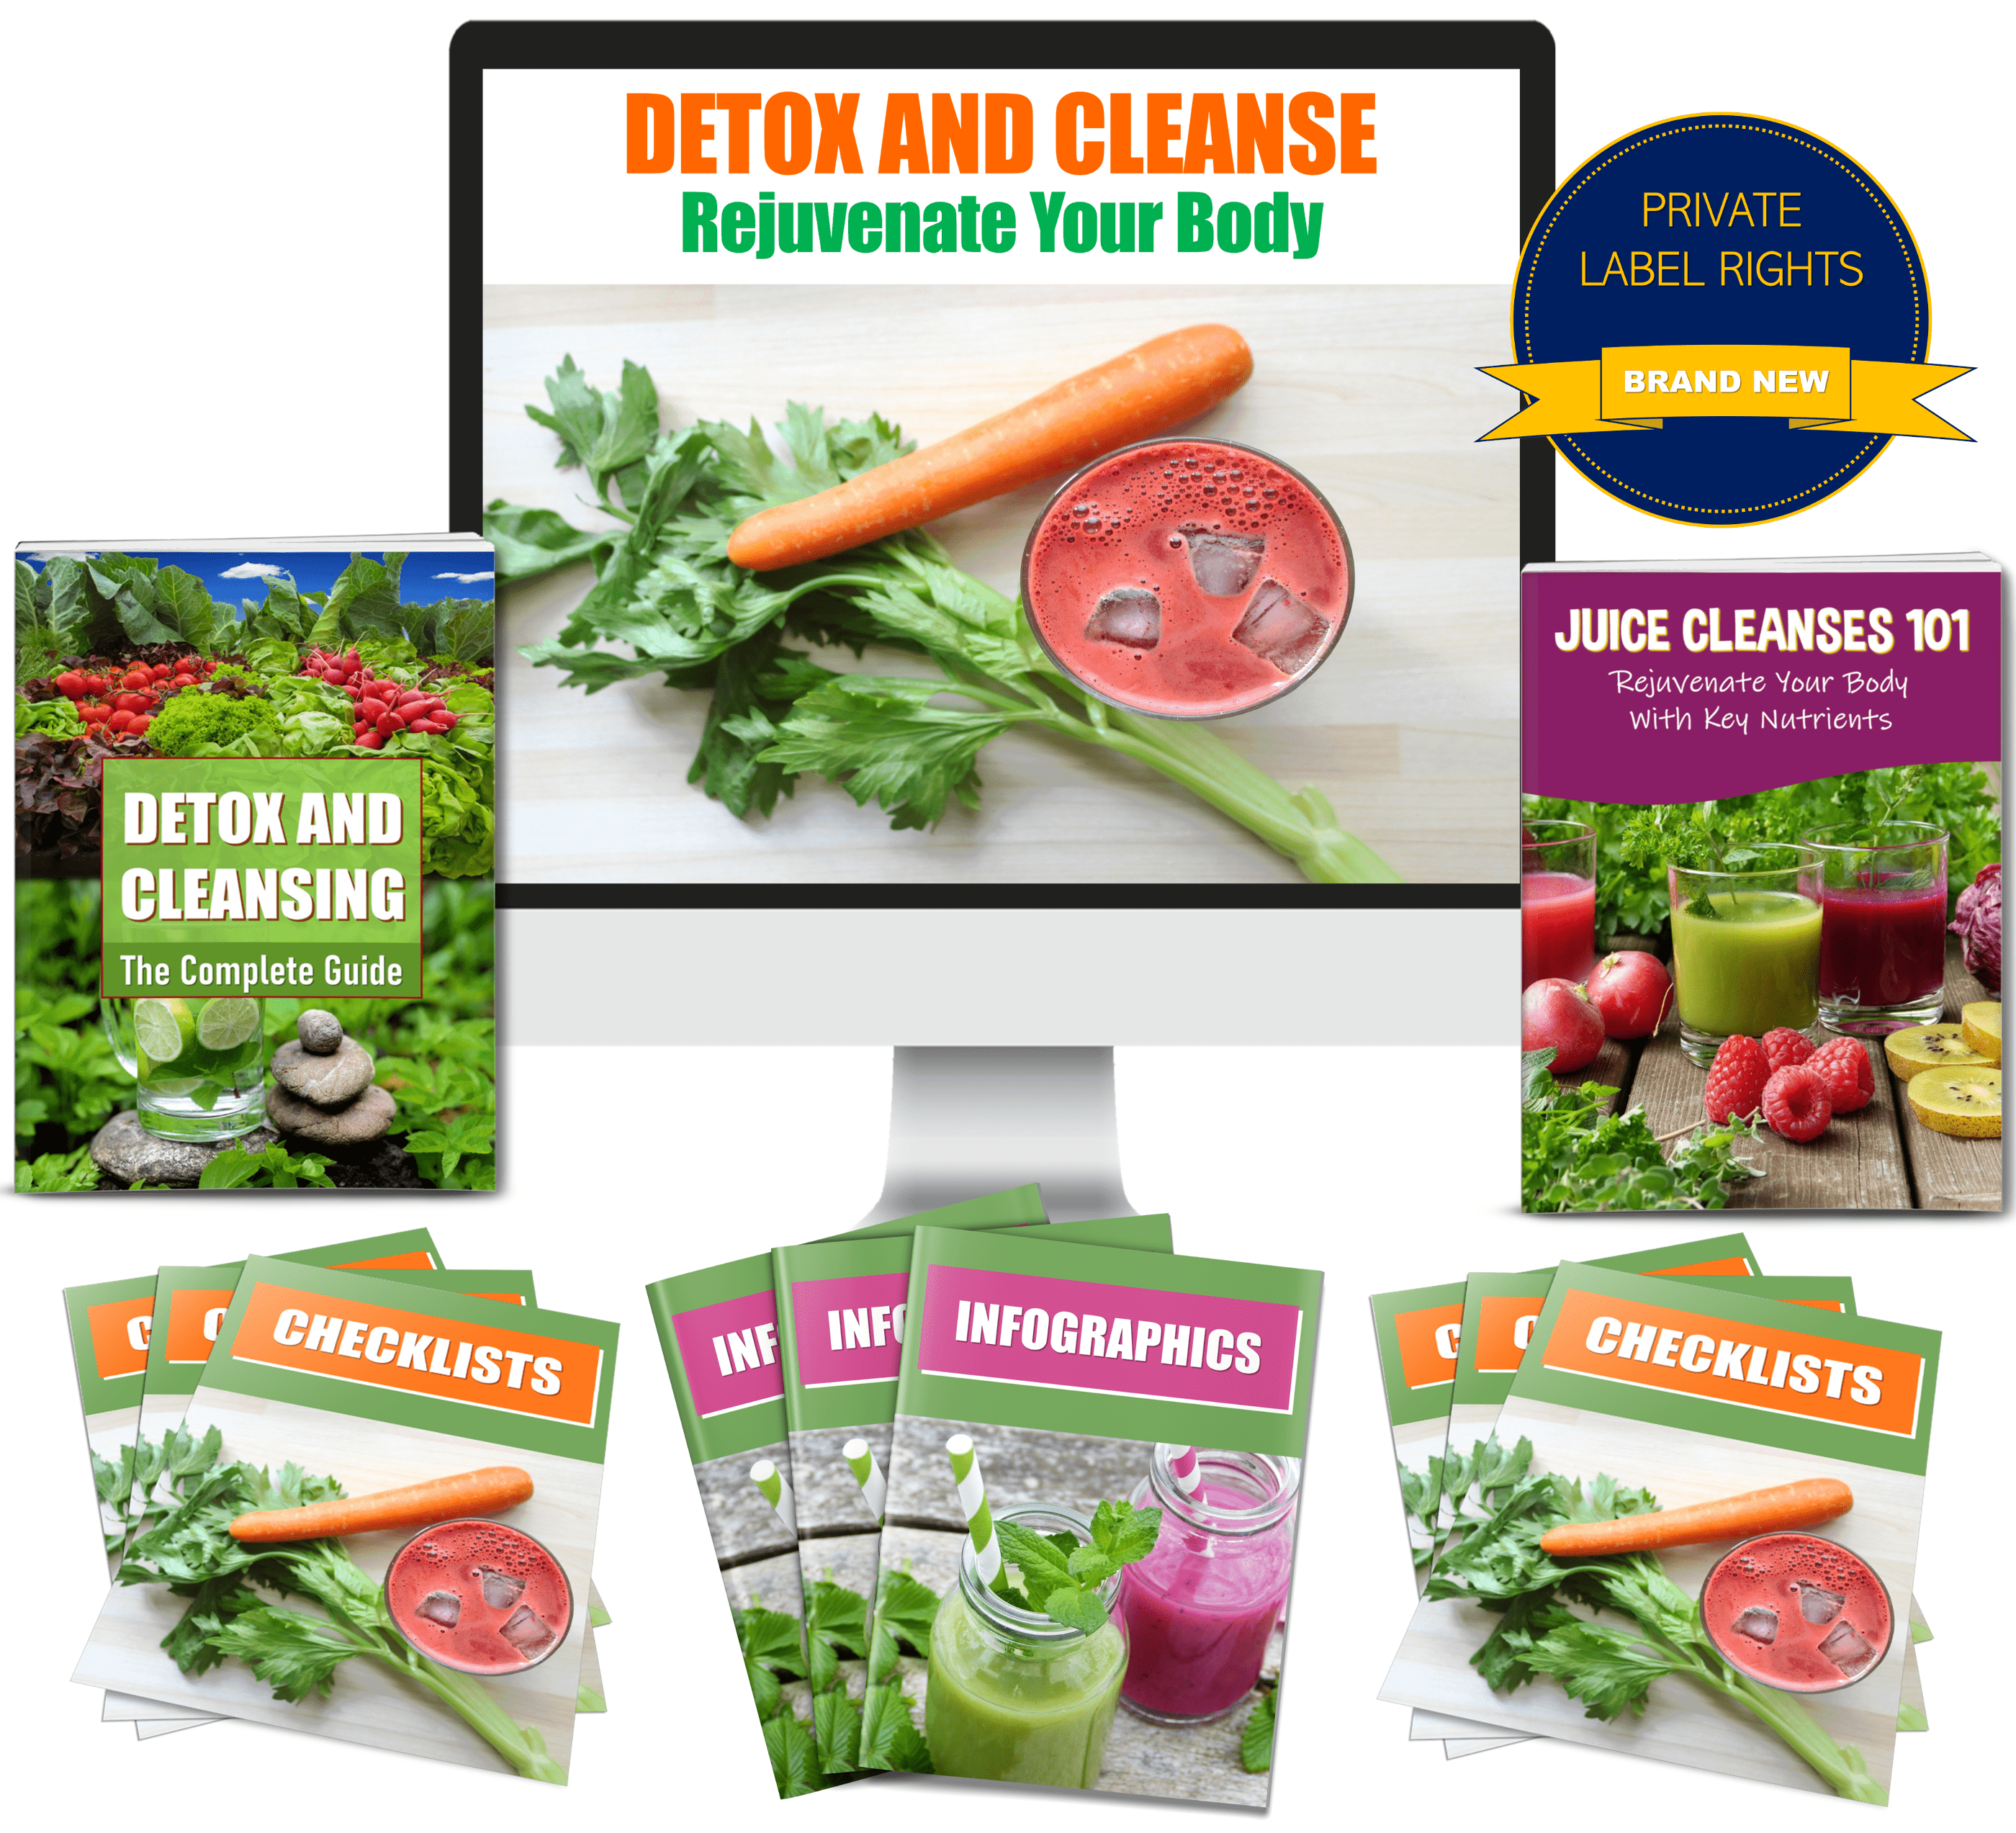 DETOX AND CLEANSE Content with PLR Rights